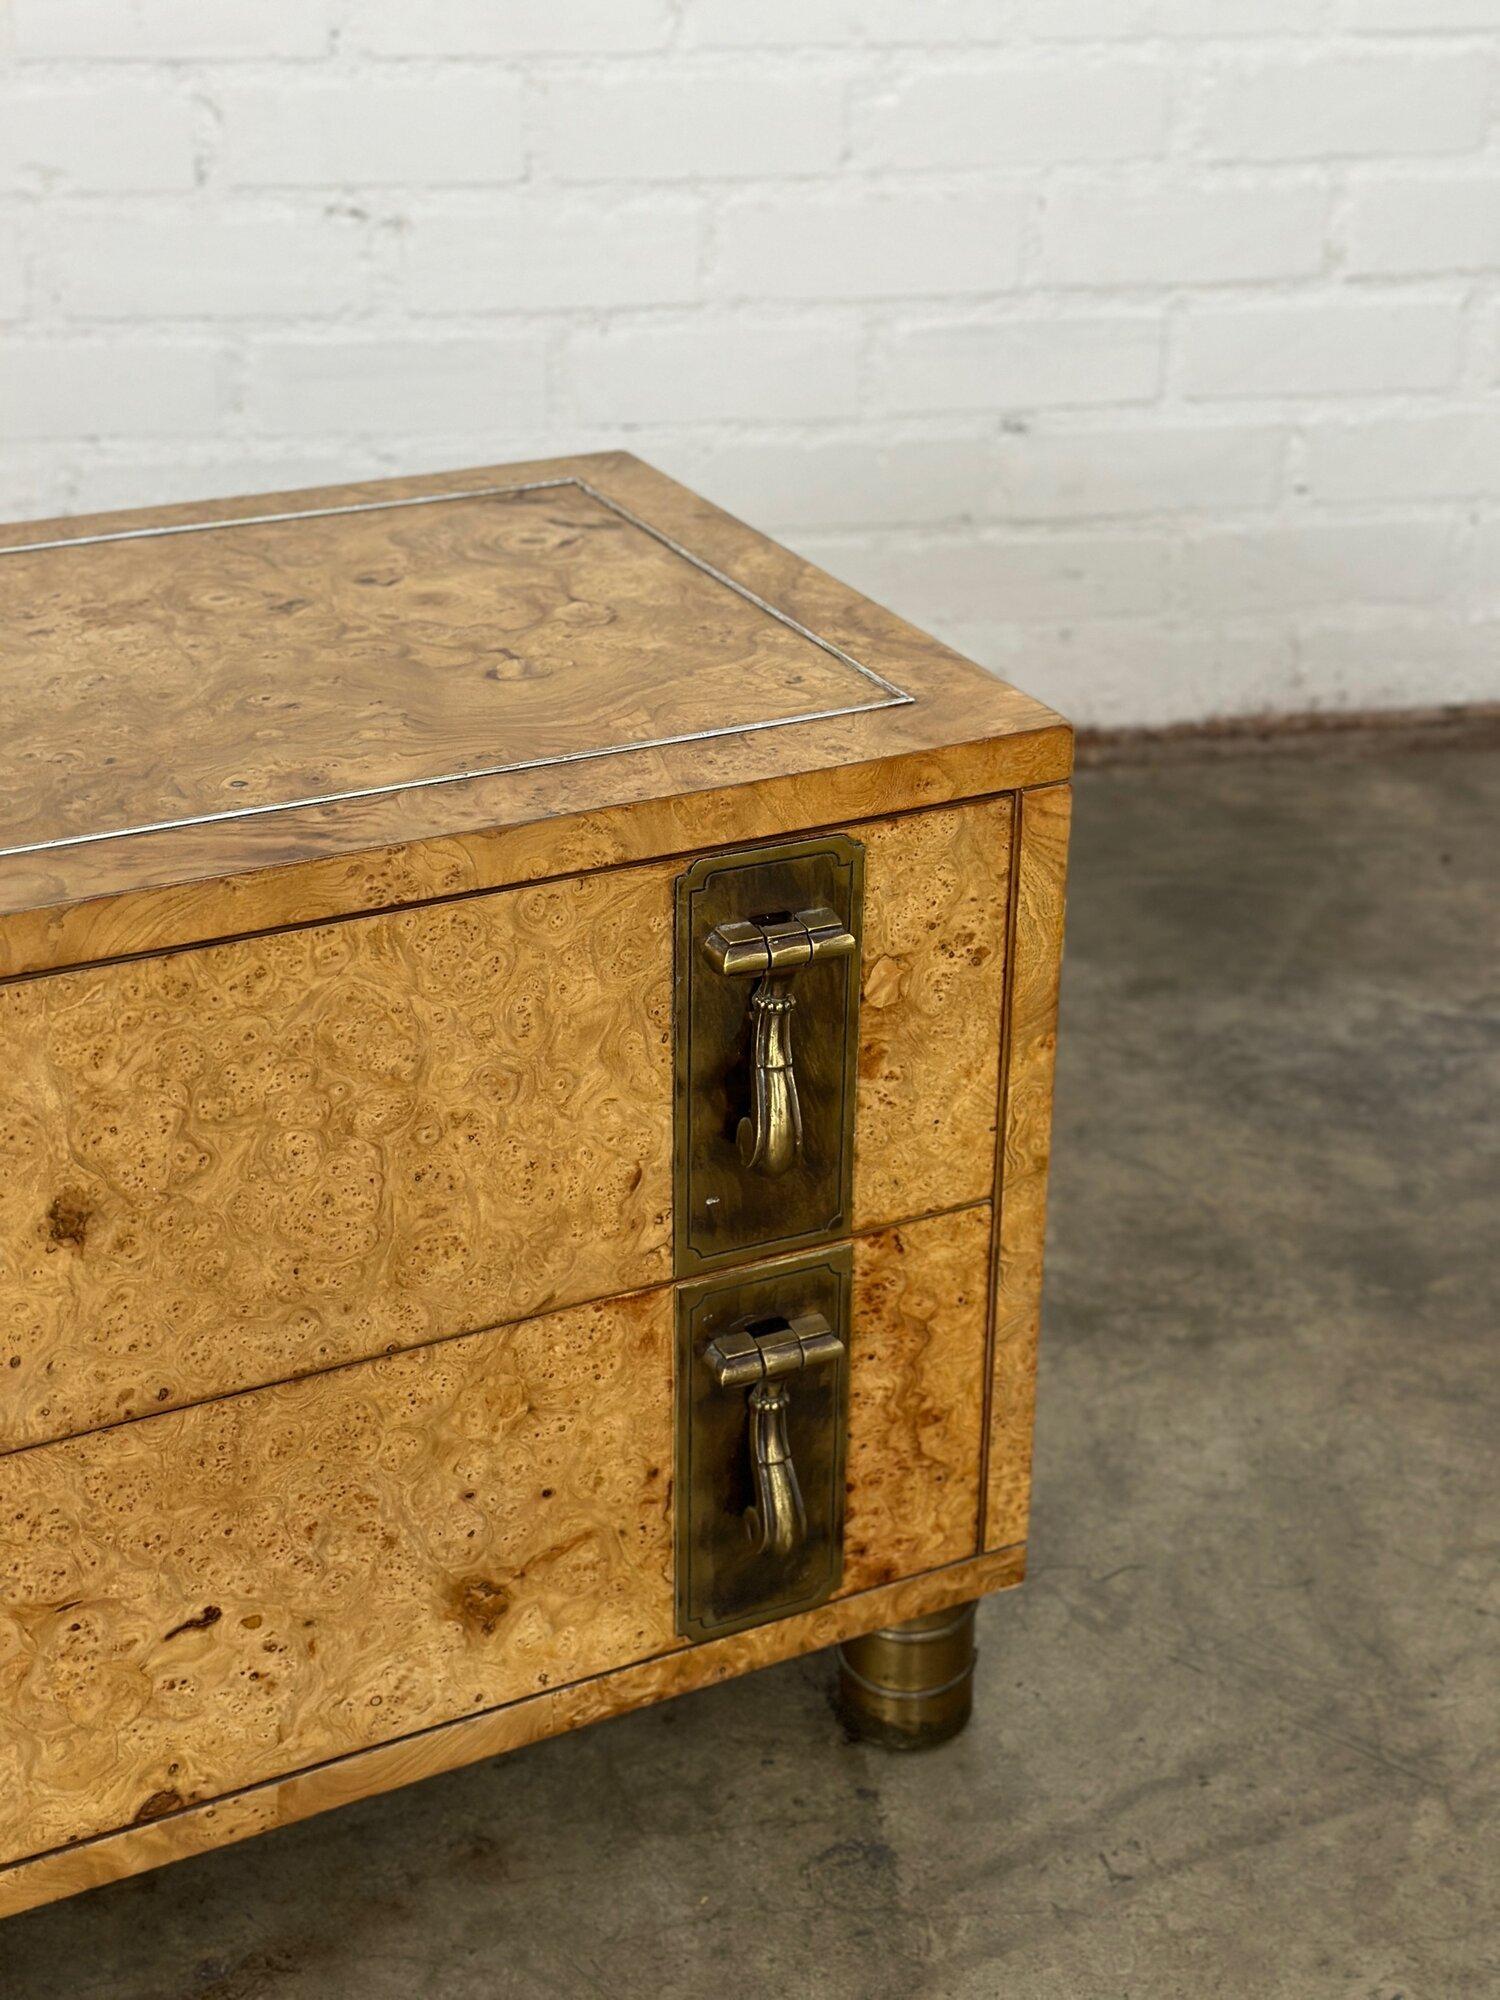 W33 D19 H22

1970’s Fully refinished Burl wood chest of drawers by Mastercraft. Item features two drawers with brass pull hardware. Sits on four cylinder brass legs. 